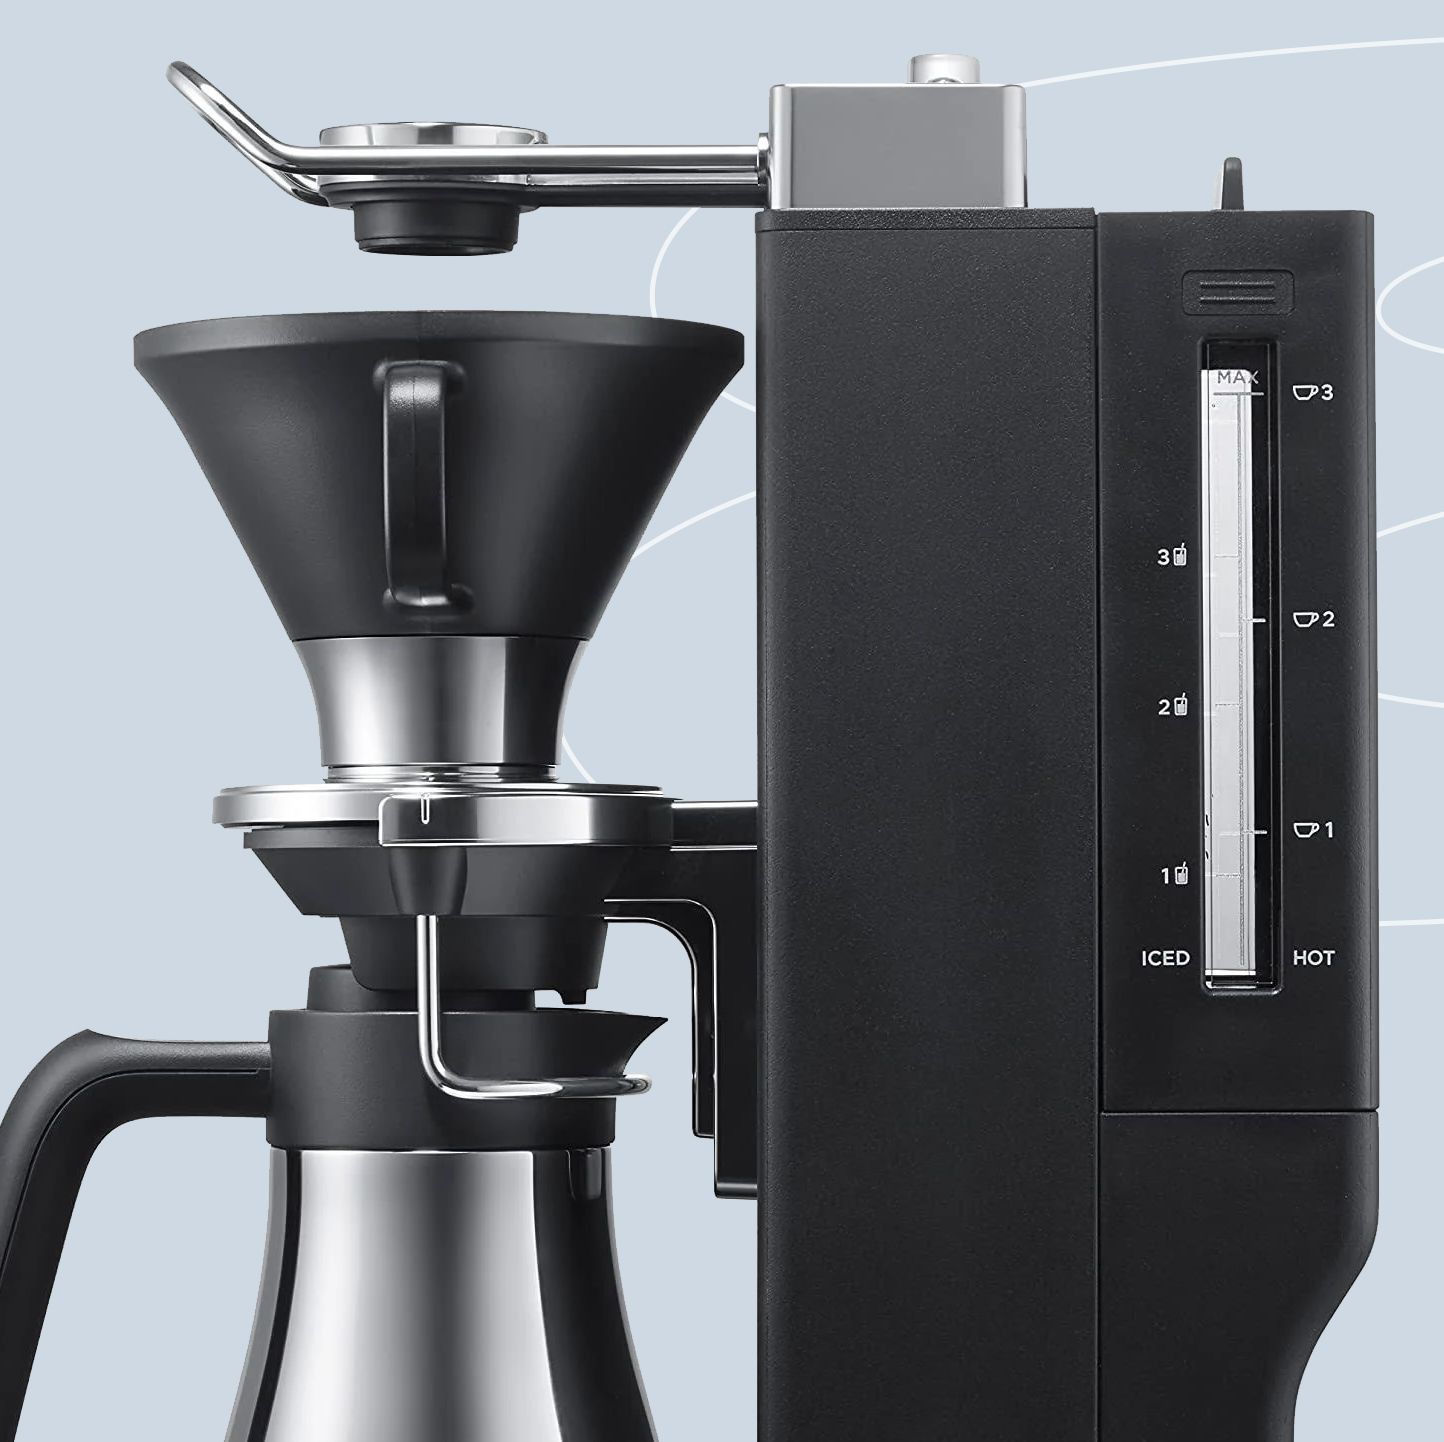 Balmuda's New Coffee Machine Gives You the Perfect Drip